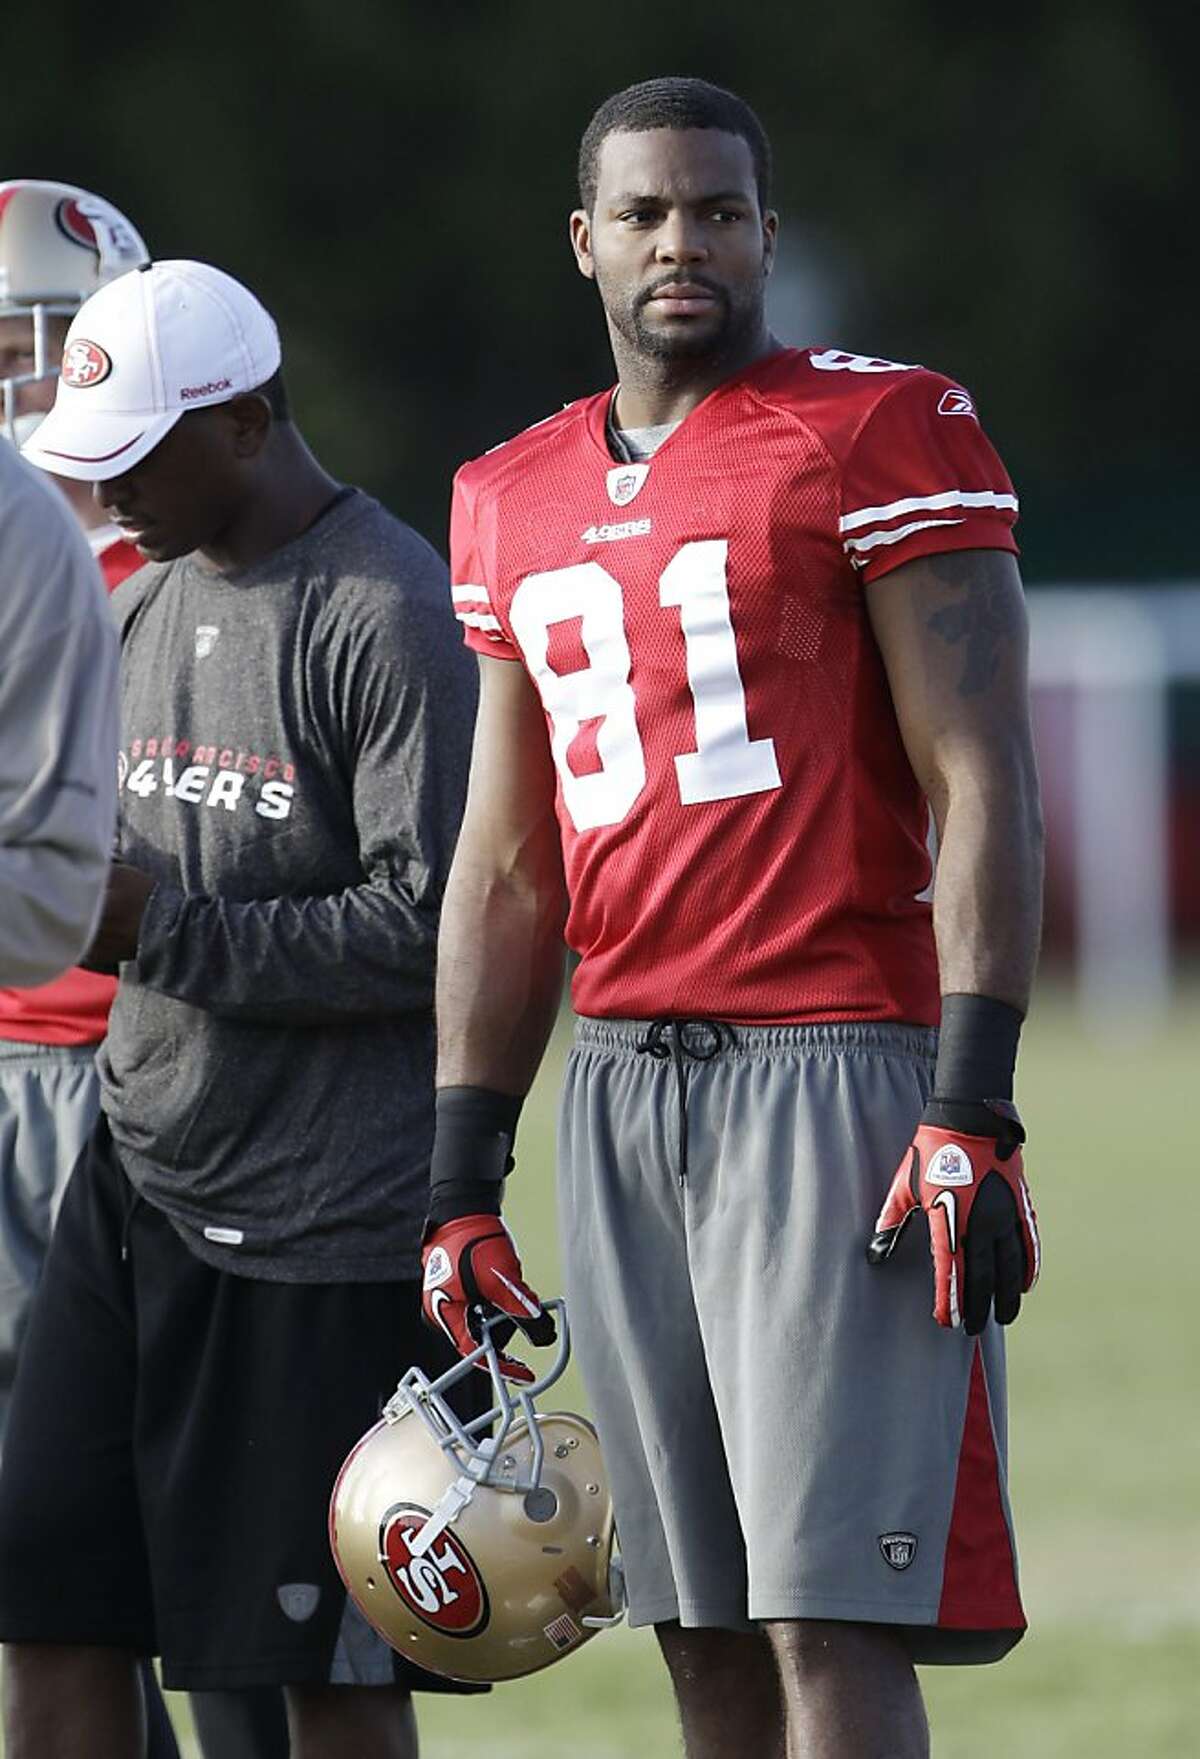 San Francisco 49ers wide receiver Braylon Edwards watches a drill during NFL football training camp Thursday, Aug. 4, 2011, in Santa Clara, Calif. (AP Photo/Paul Sakuma) Ran on: 08-11-2011 49ers receiver Braylon Edwards was schooled in the Michigan way. Ran on: 08-11-2011 49ers receiver Braylon Edwards was schooled in the Michigan way. Ran on: 10-29-2011 Braylon Edwards return will be a game-time decision. Ran on: 10-29-2011 Braylon Edwards return will be a game-time decision.